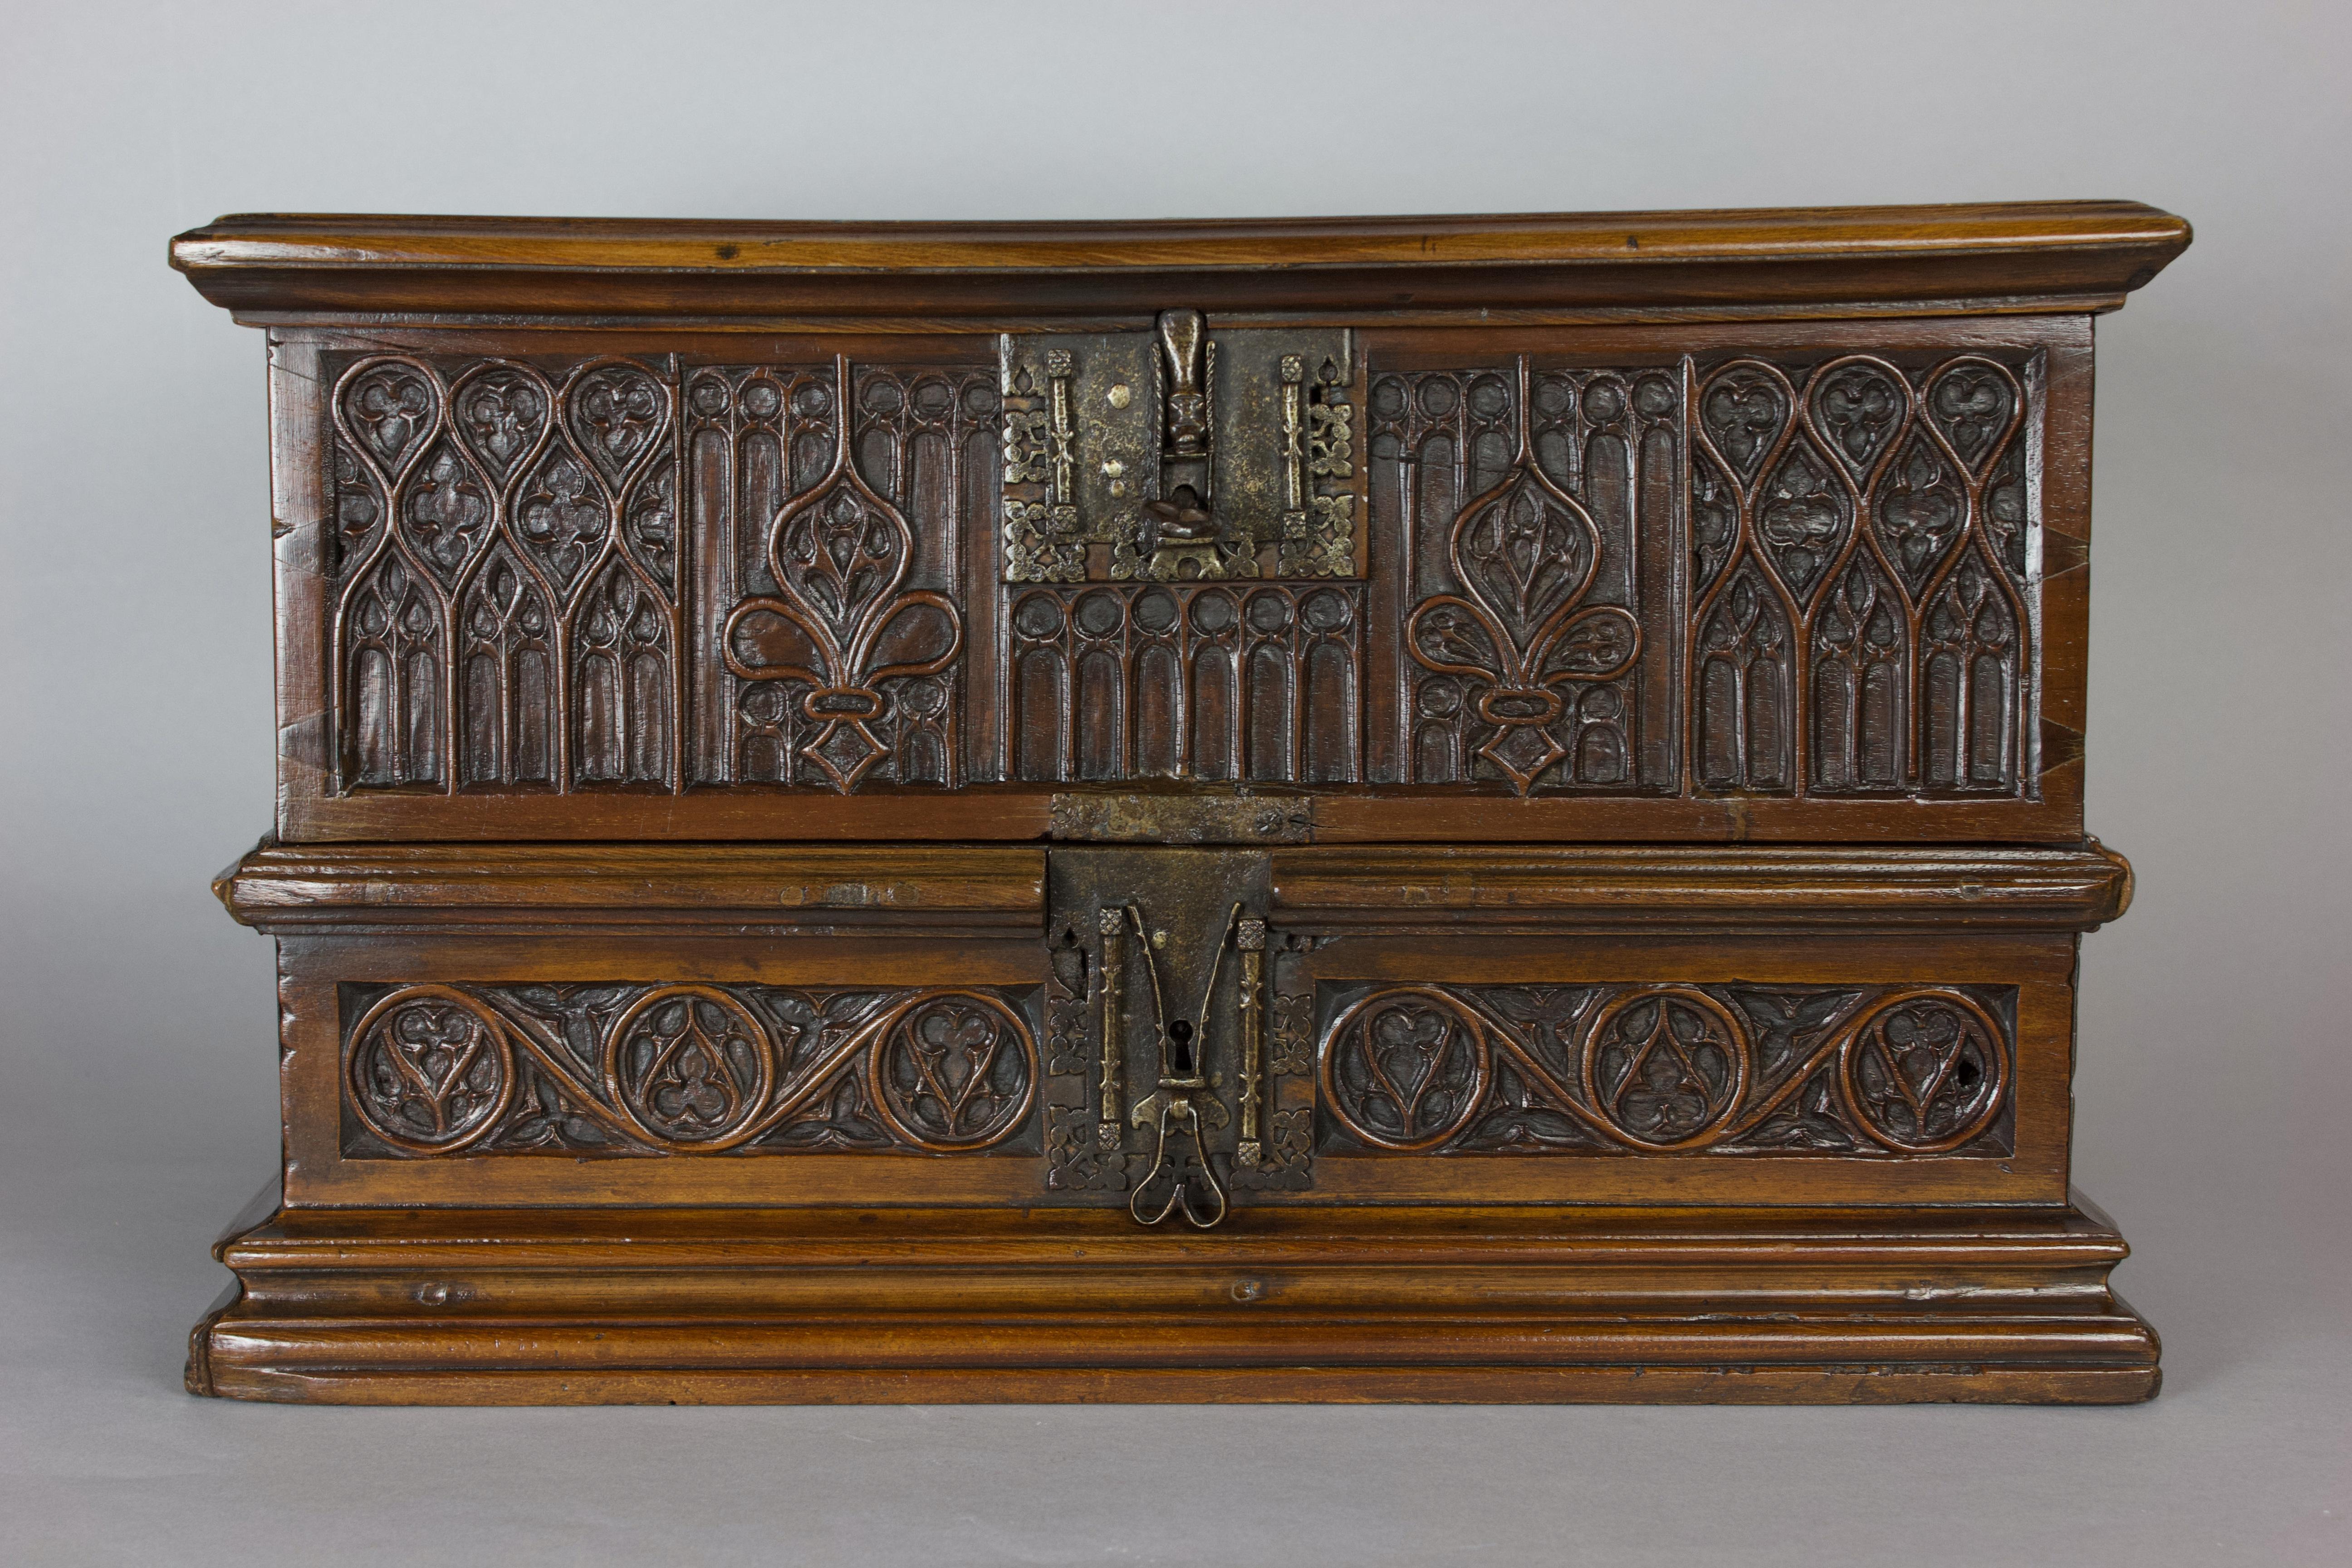 A very rare Spanish 15th/16th Century walnut casket, also known as an arqueta. 

Circa 1500.

Exceedingly finely decorated with Gothic decoration and original elaborate metalwork.

The top and back are embellished with a multitude of relief cast St